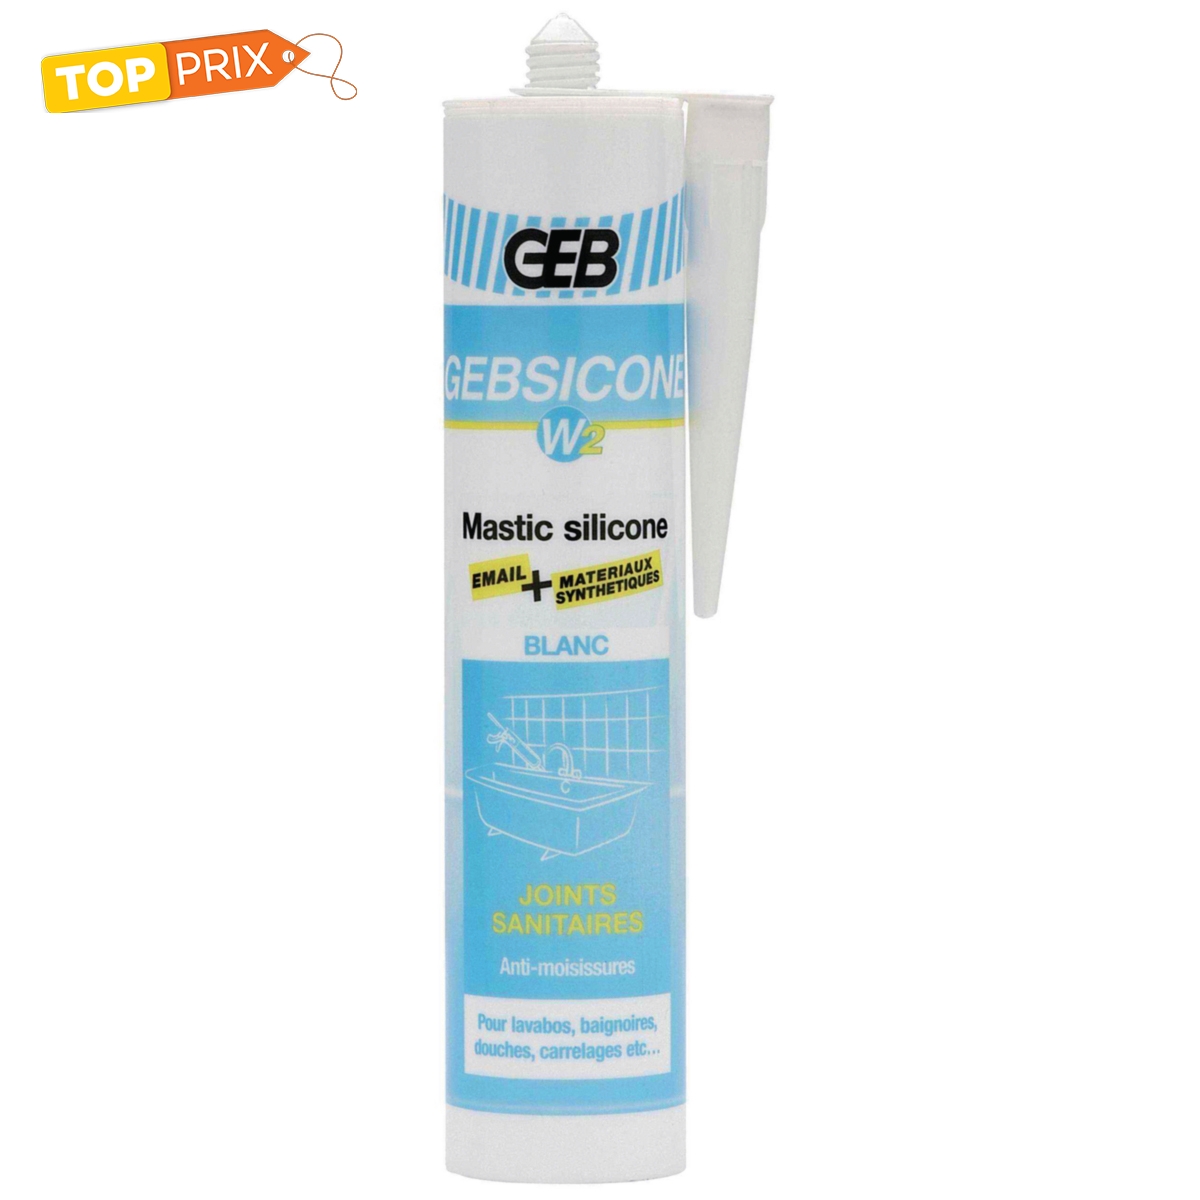 Joint silicone blanc Cartouche 310 ml.